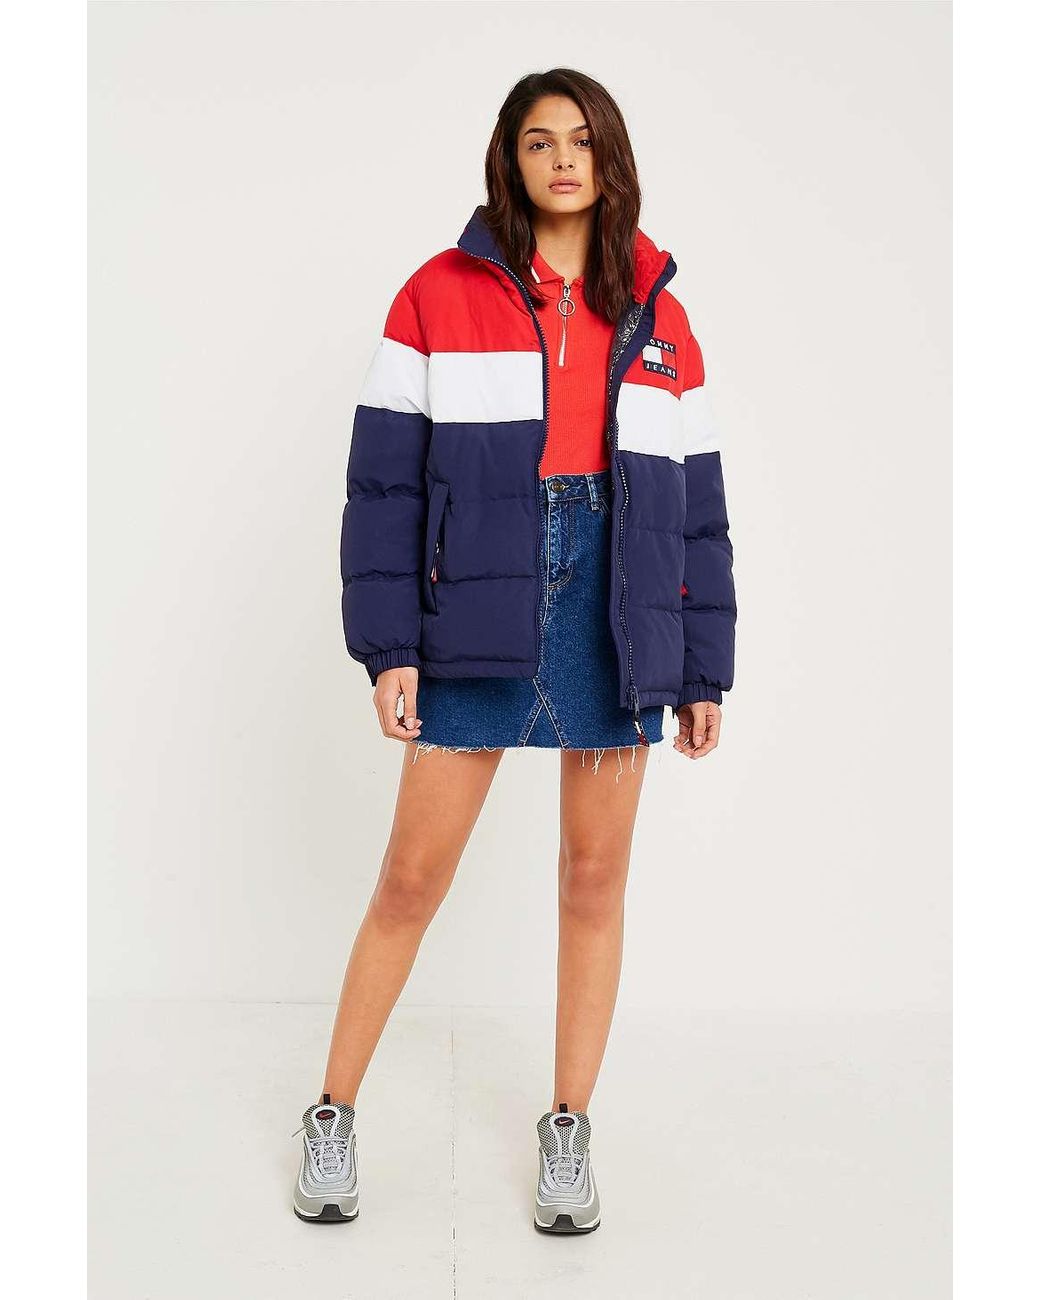 Tommy Hilfiger Denim '90s Red White And Blue Puffer Jacket | Lyst UK